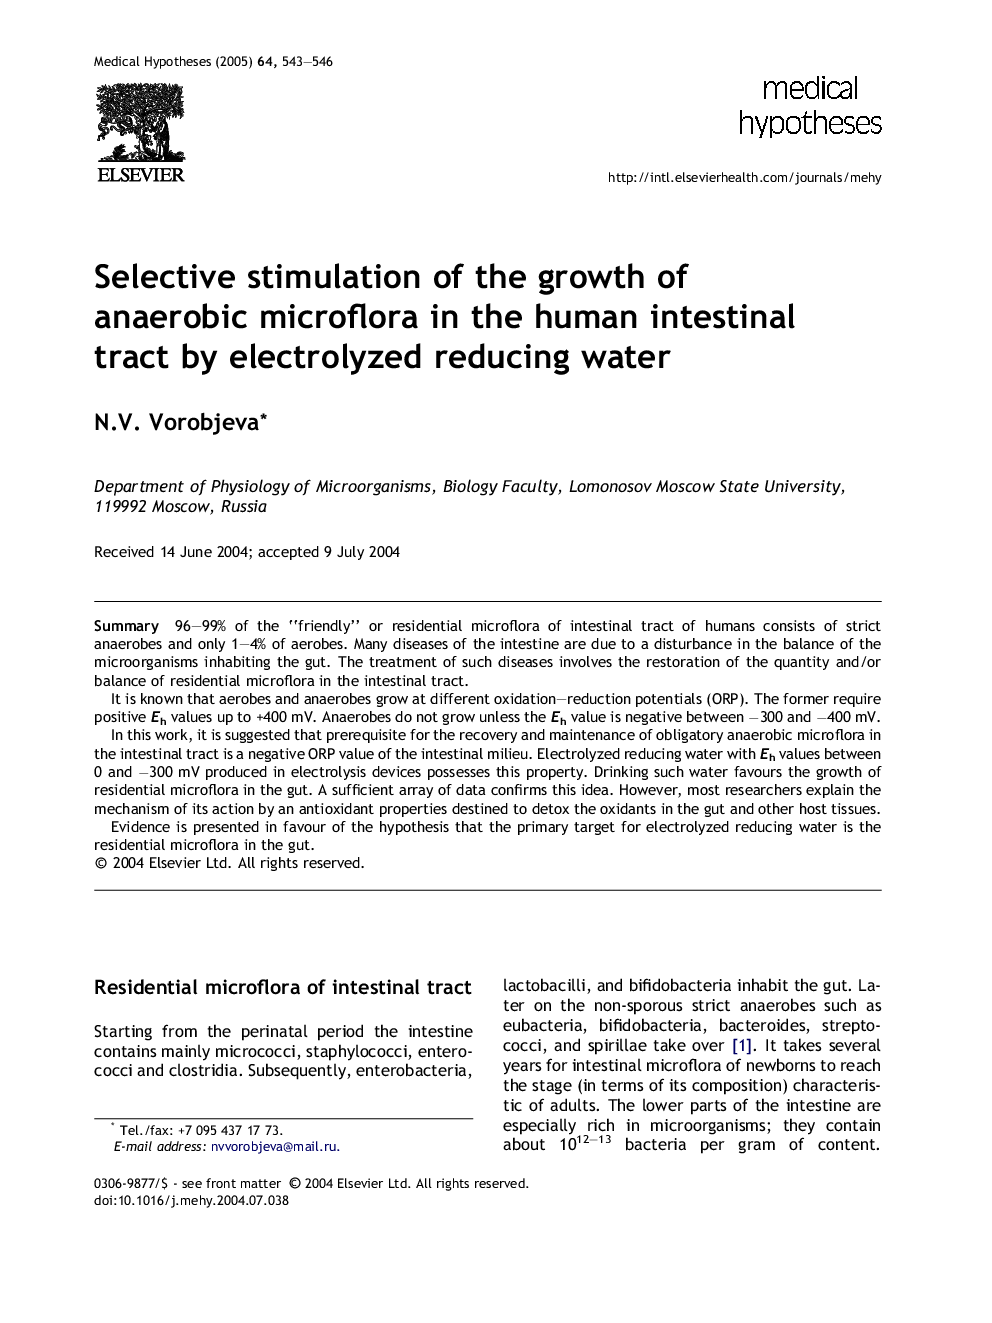 Selective stimulation of the growth of anaerobic microflora in the human intestinal tract by electrolyzed reducing water